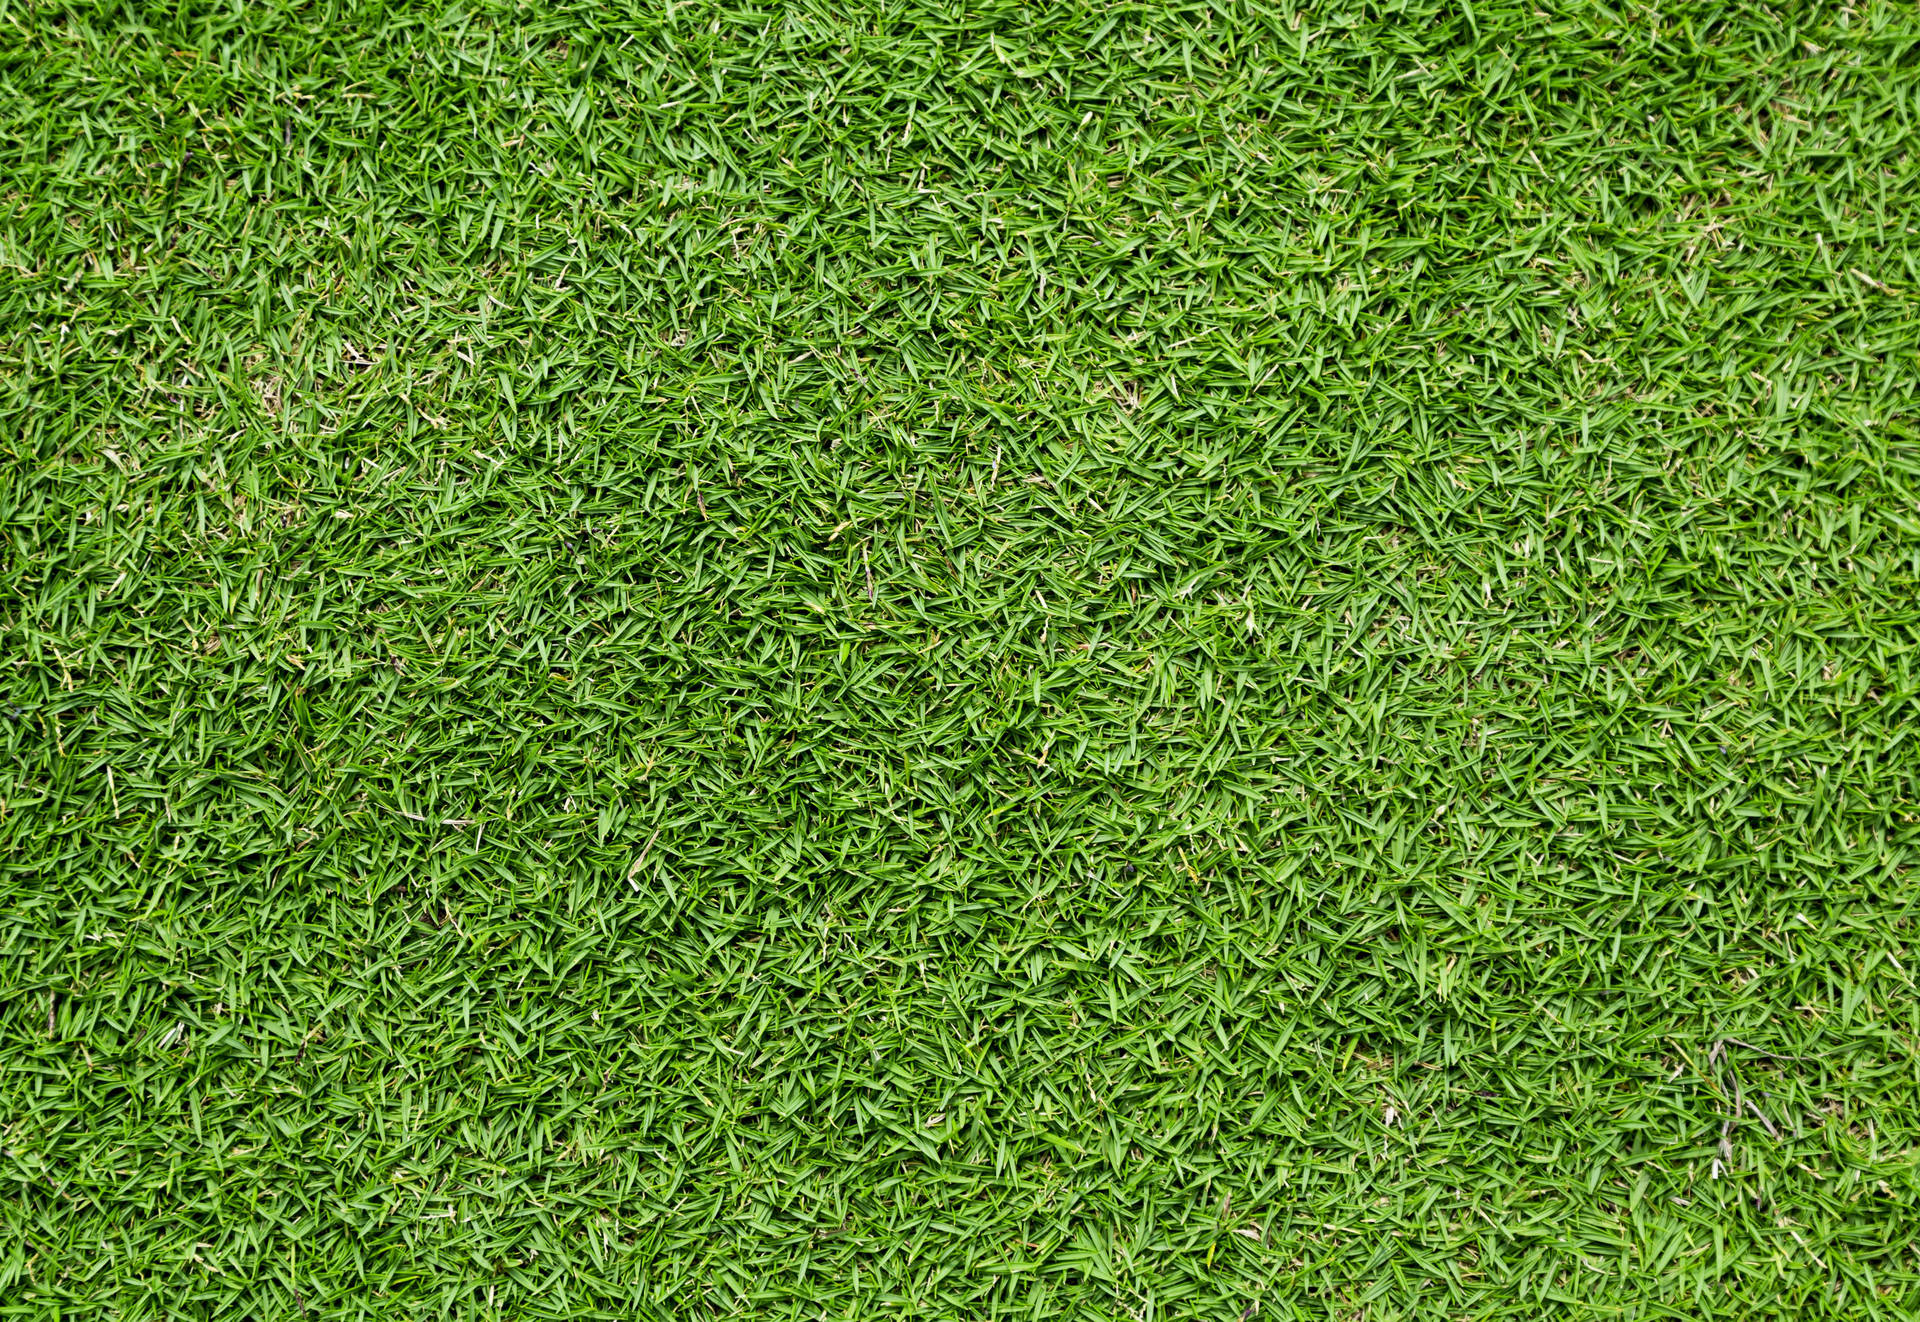 Grass 4672X3216 Wallpaper and Background Image